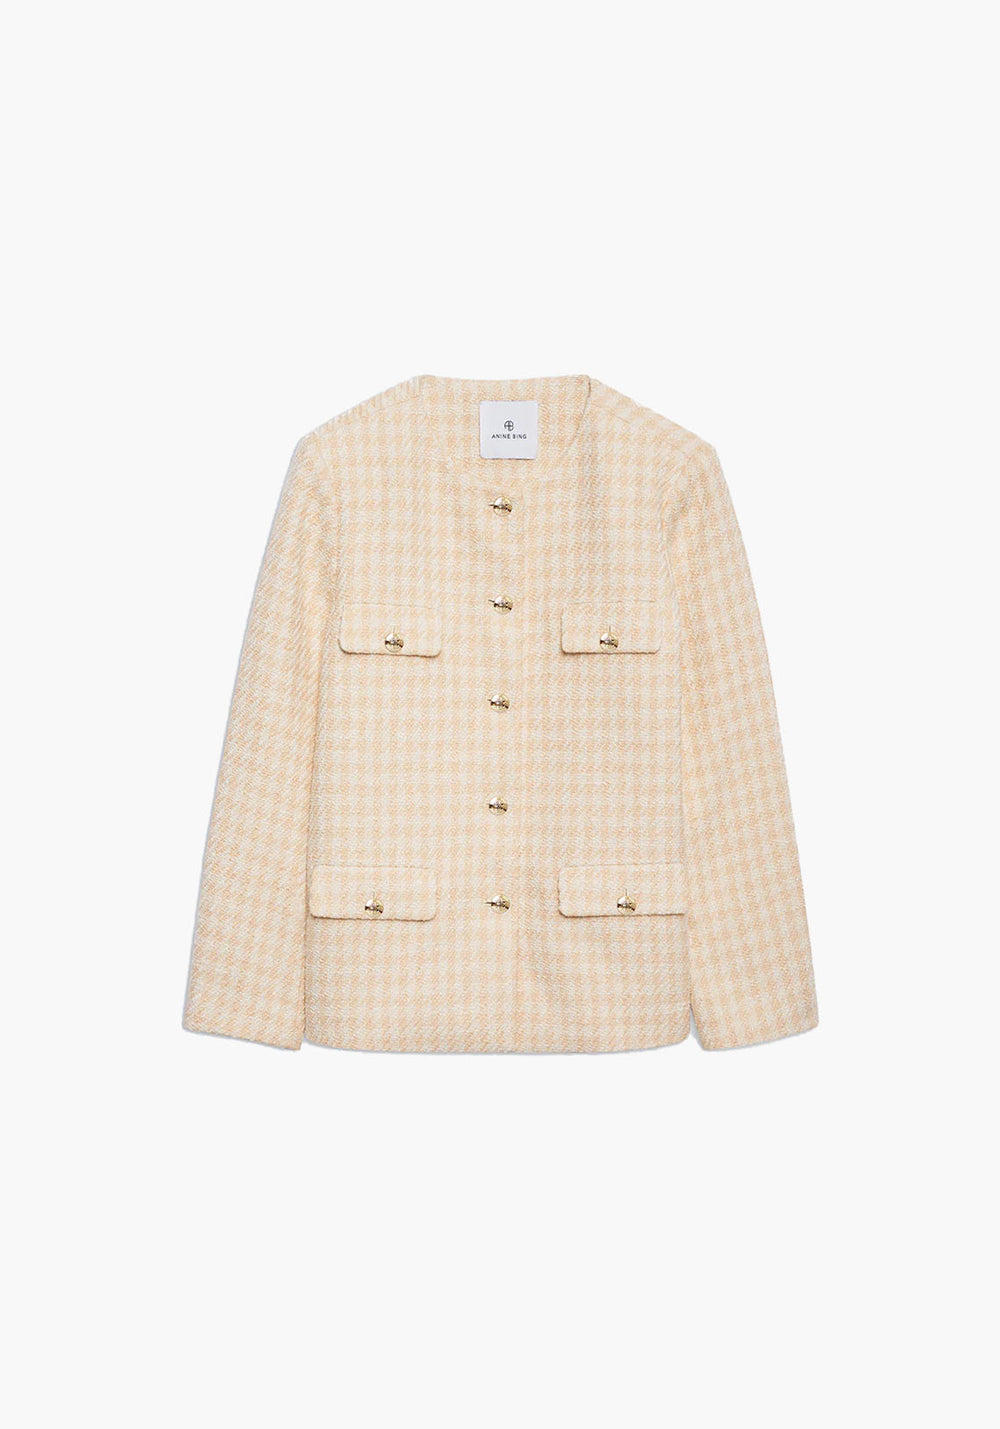 JANET JACKET CREAM AND PEACH HOUNDSTOOTH